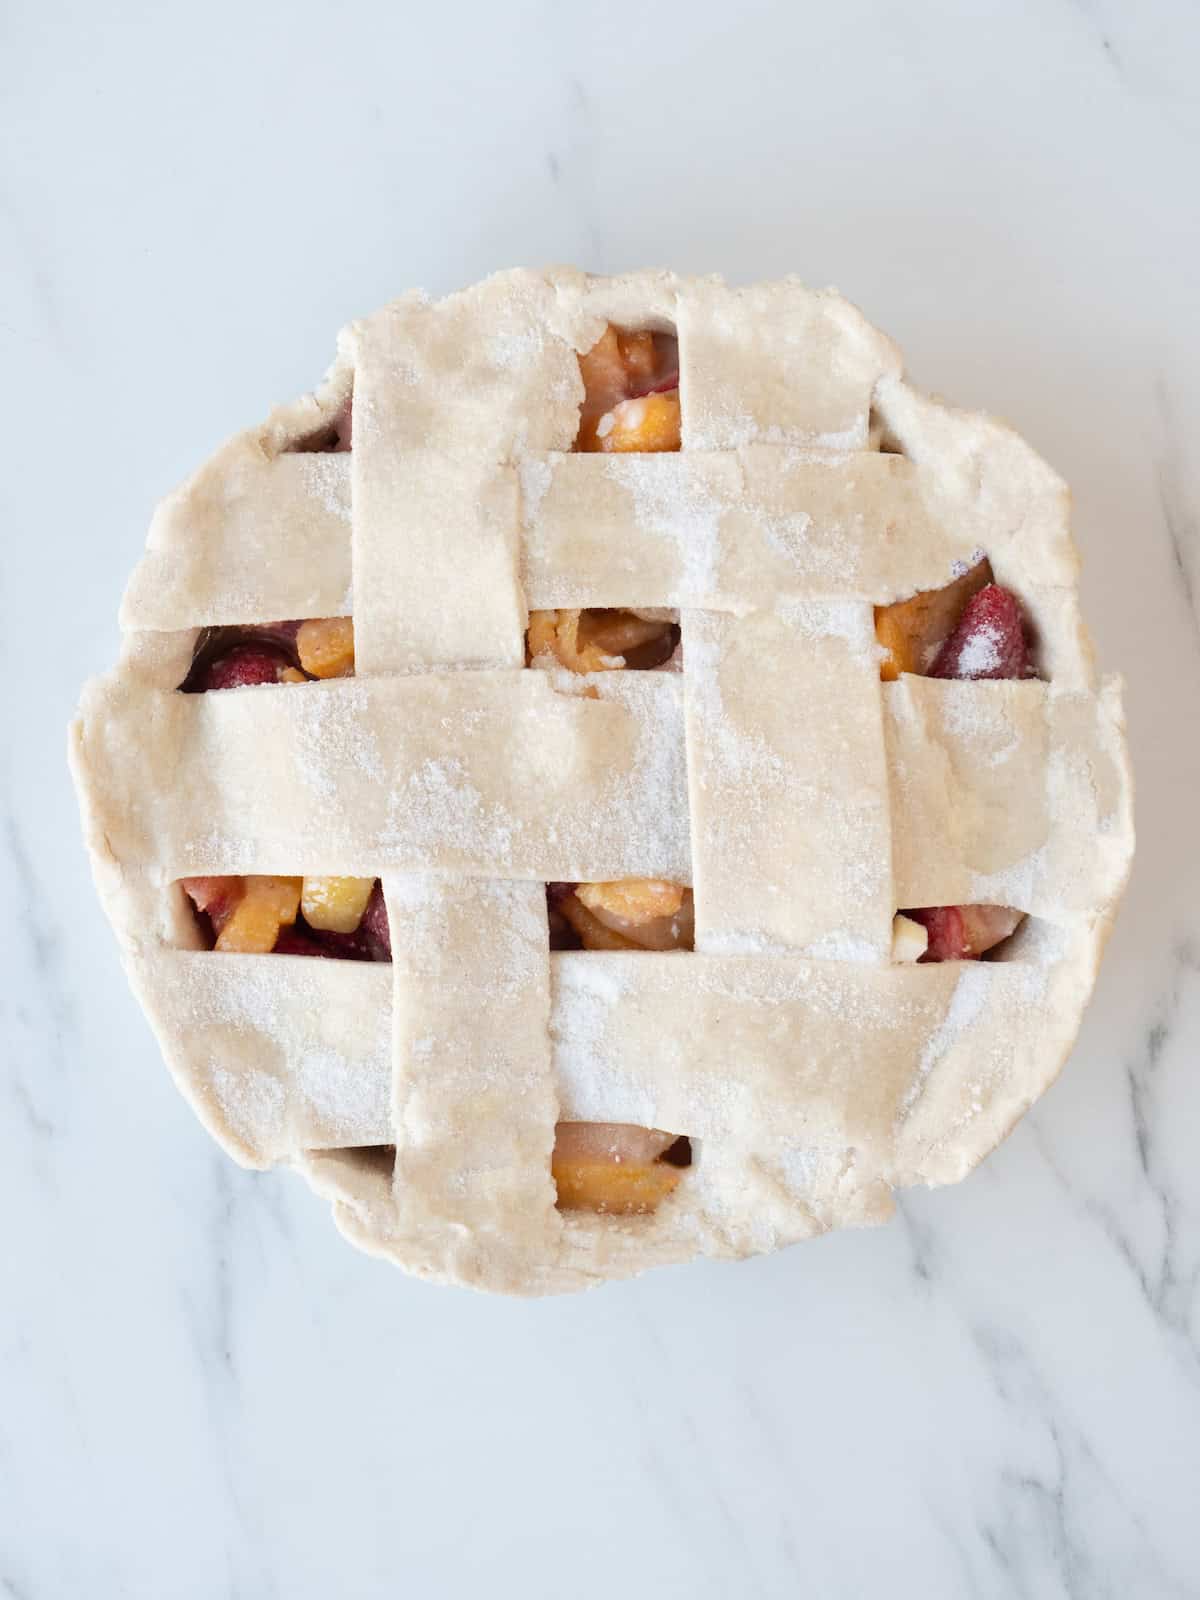 A pie pan lined with pie dough and filled with the strawberry-peach filling, and sealed on top with a lattice that is made out of pie dough cut intro strips and brushed with egg white wash.